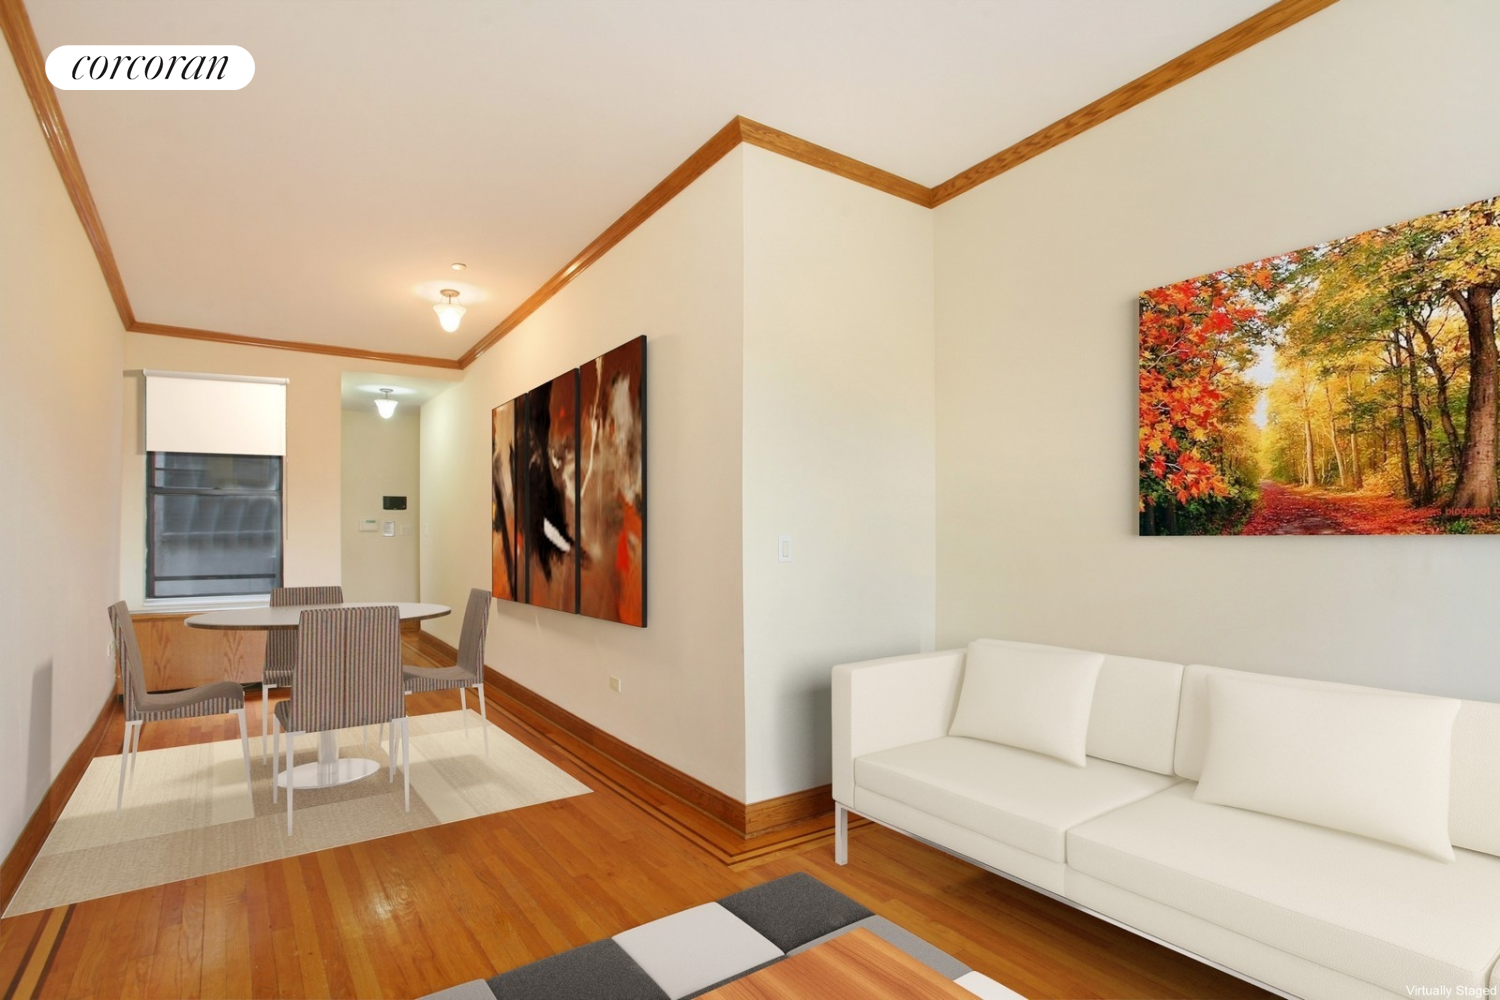 13 East 131st Street 5A, Central Harlem, Upper Manhattan, NYC - 2 Bedrooms  
1 Bathrooms  
4 Rooms - 